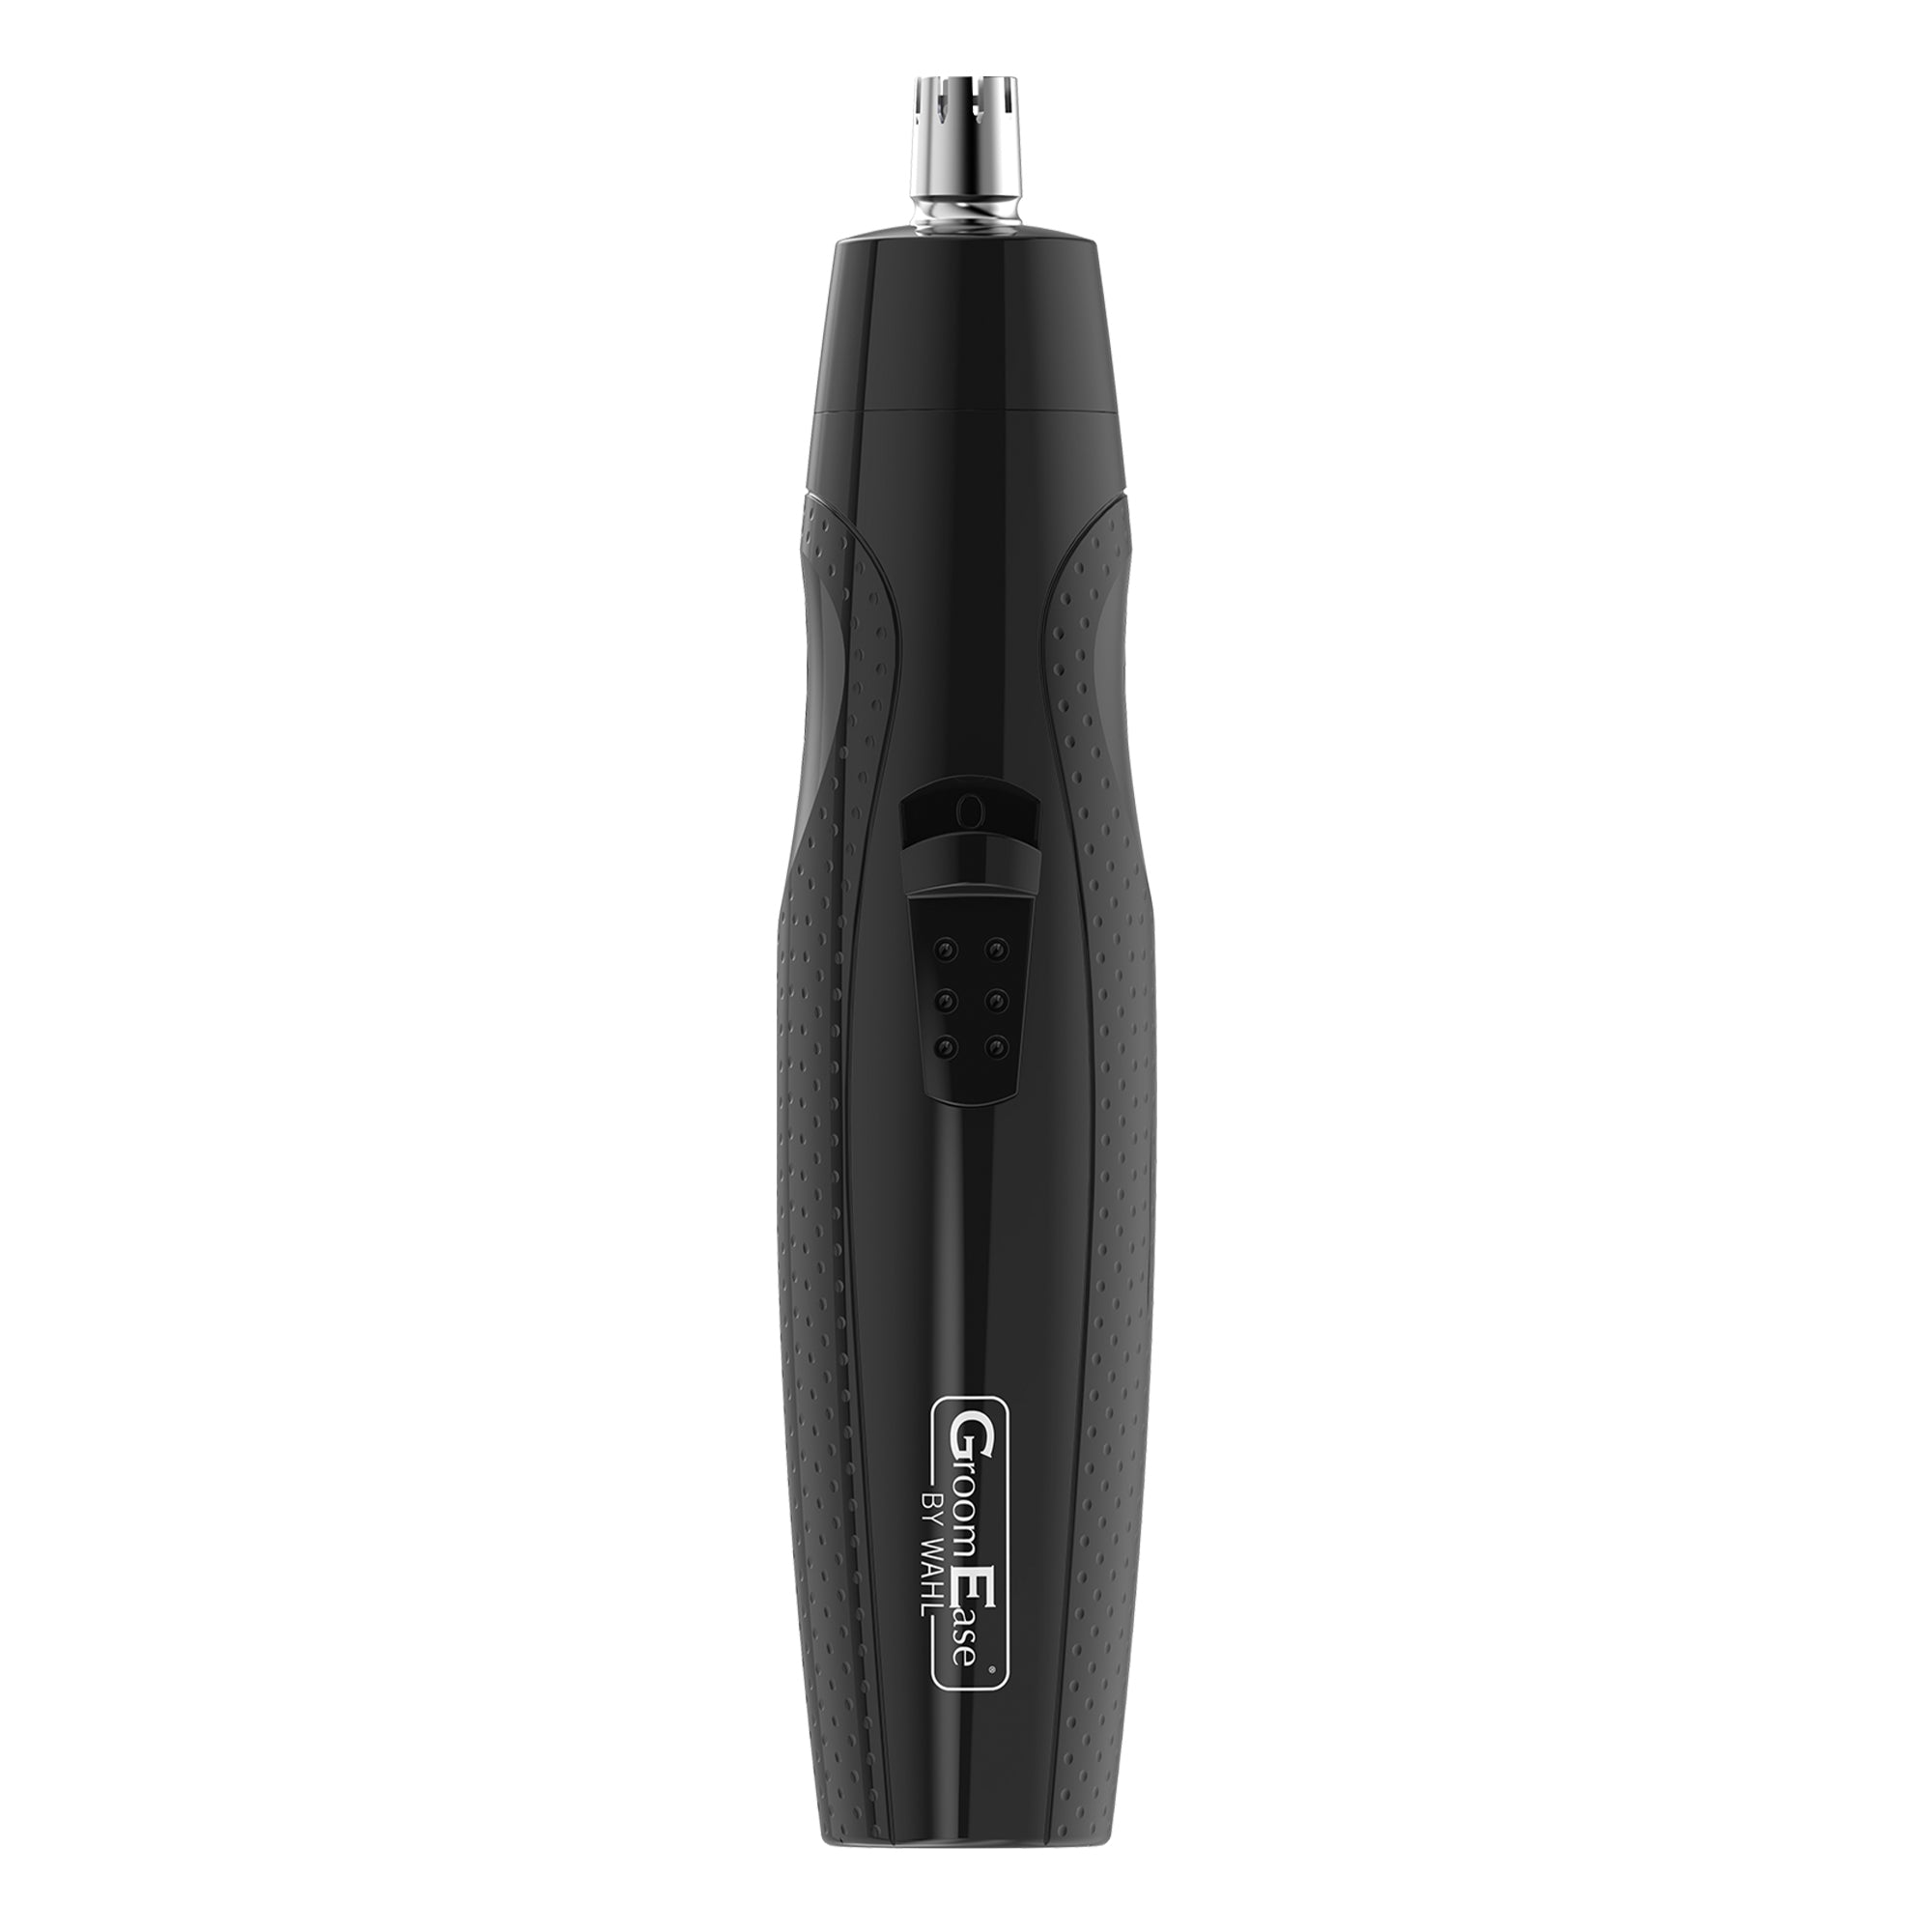 Wahl GroomEase 3-in-1 Personal Hair Trimmer Kit